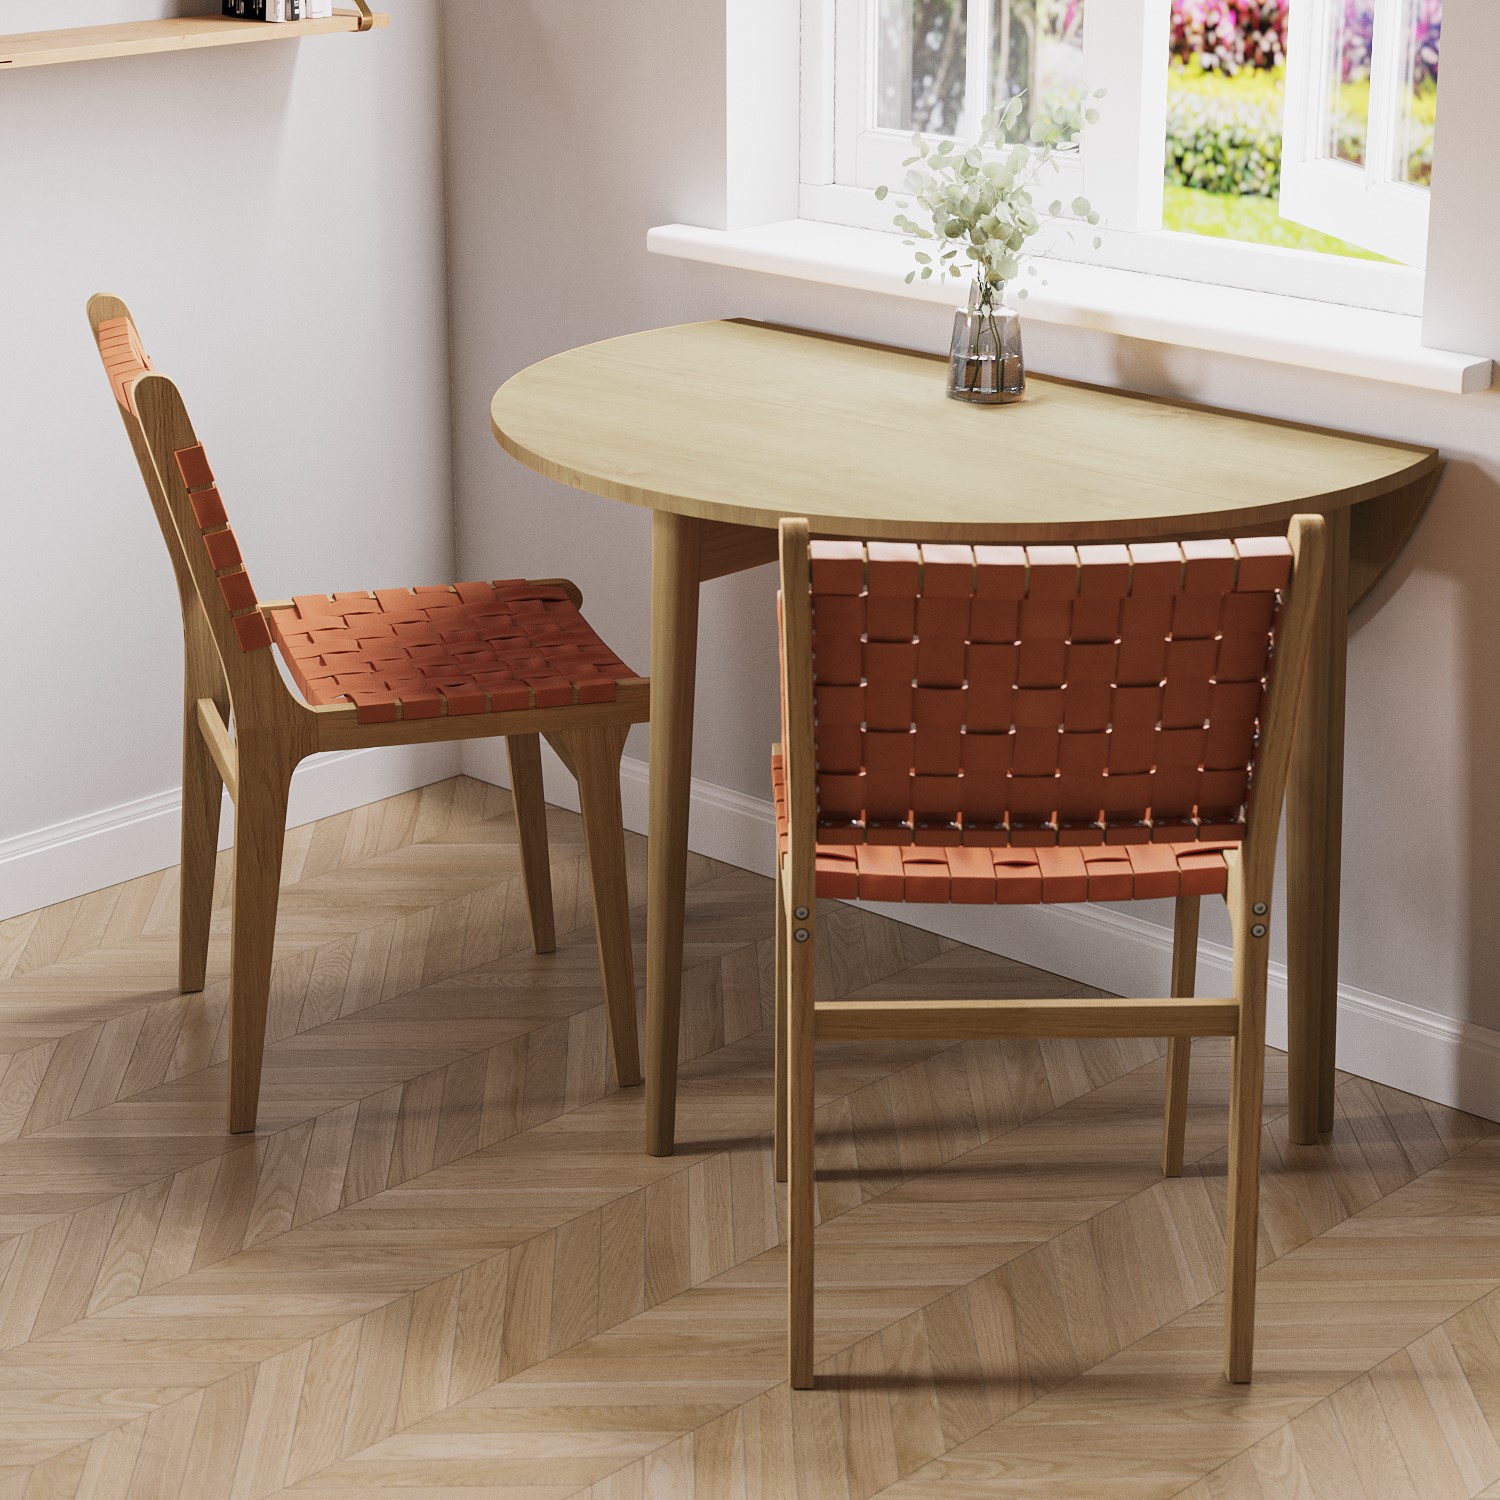 Photo of Round oak drop leaf dining table with 2 tan faux leather dining chairs - rudy